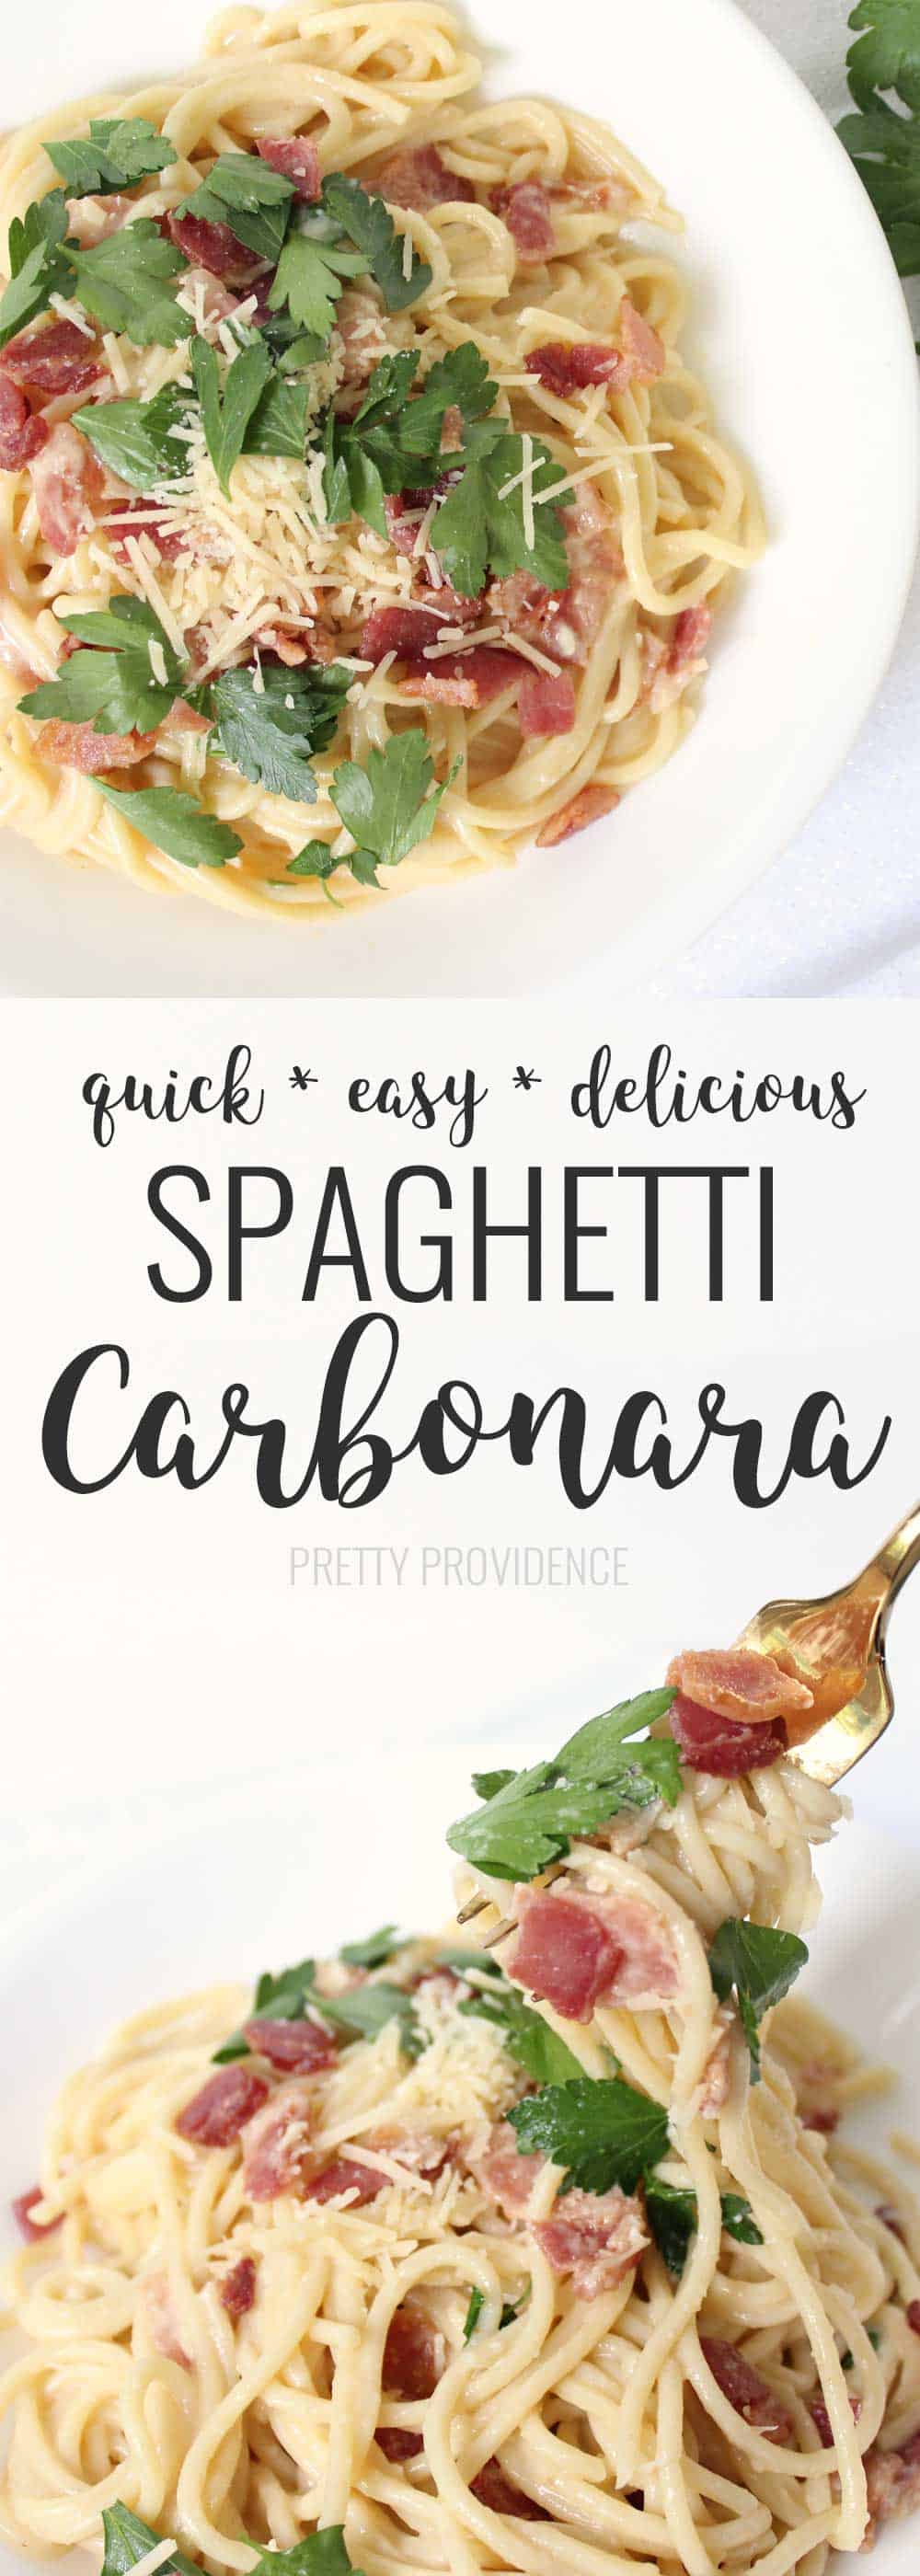 I love this spaghetti carbonara because it's so easy, delicious and quick! Bacon for the win.